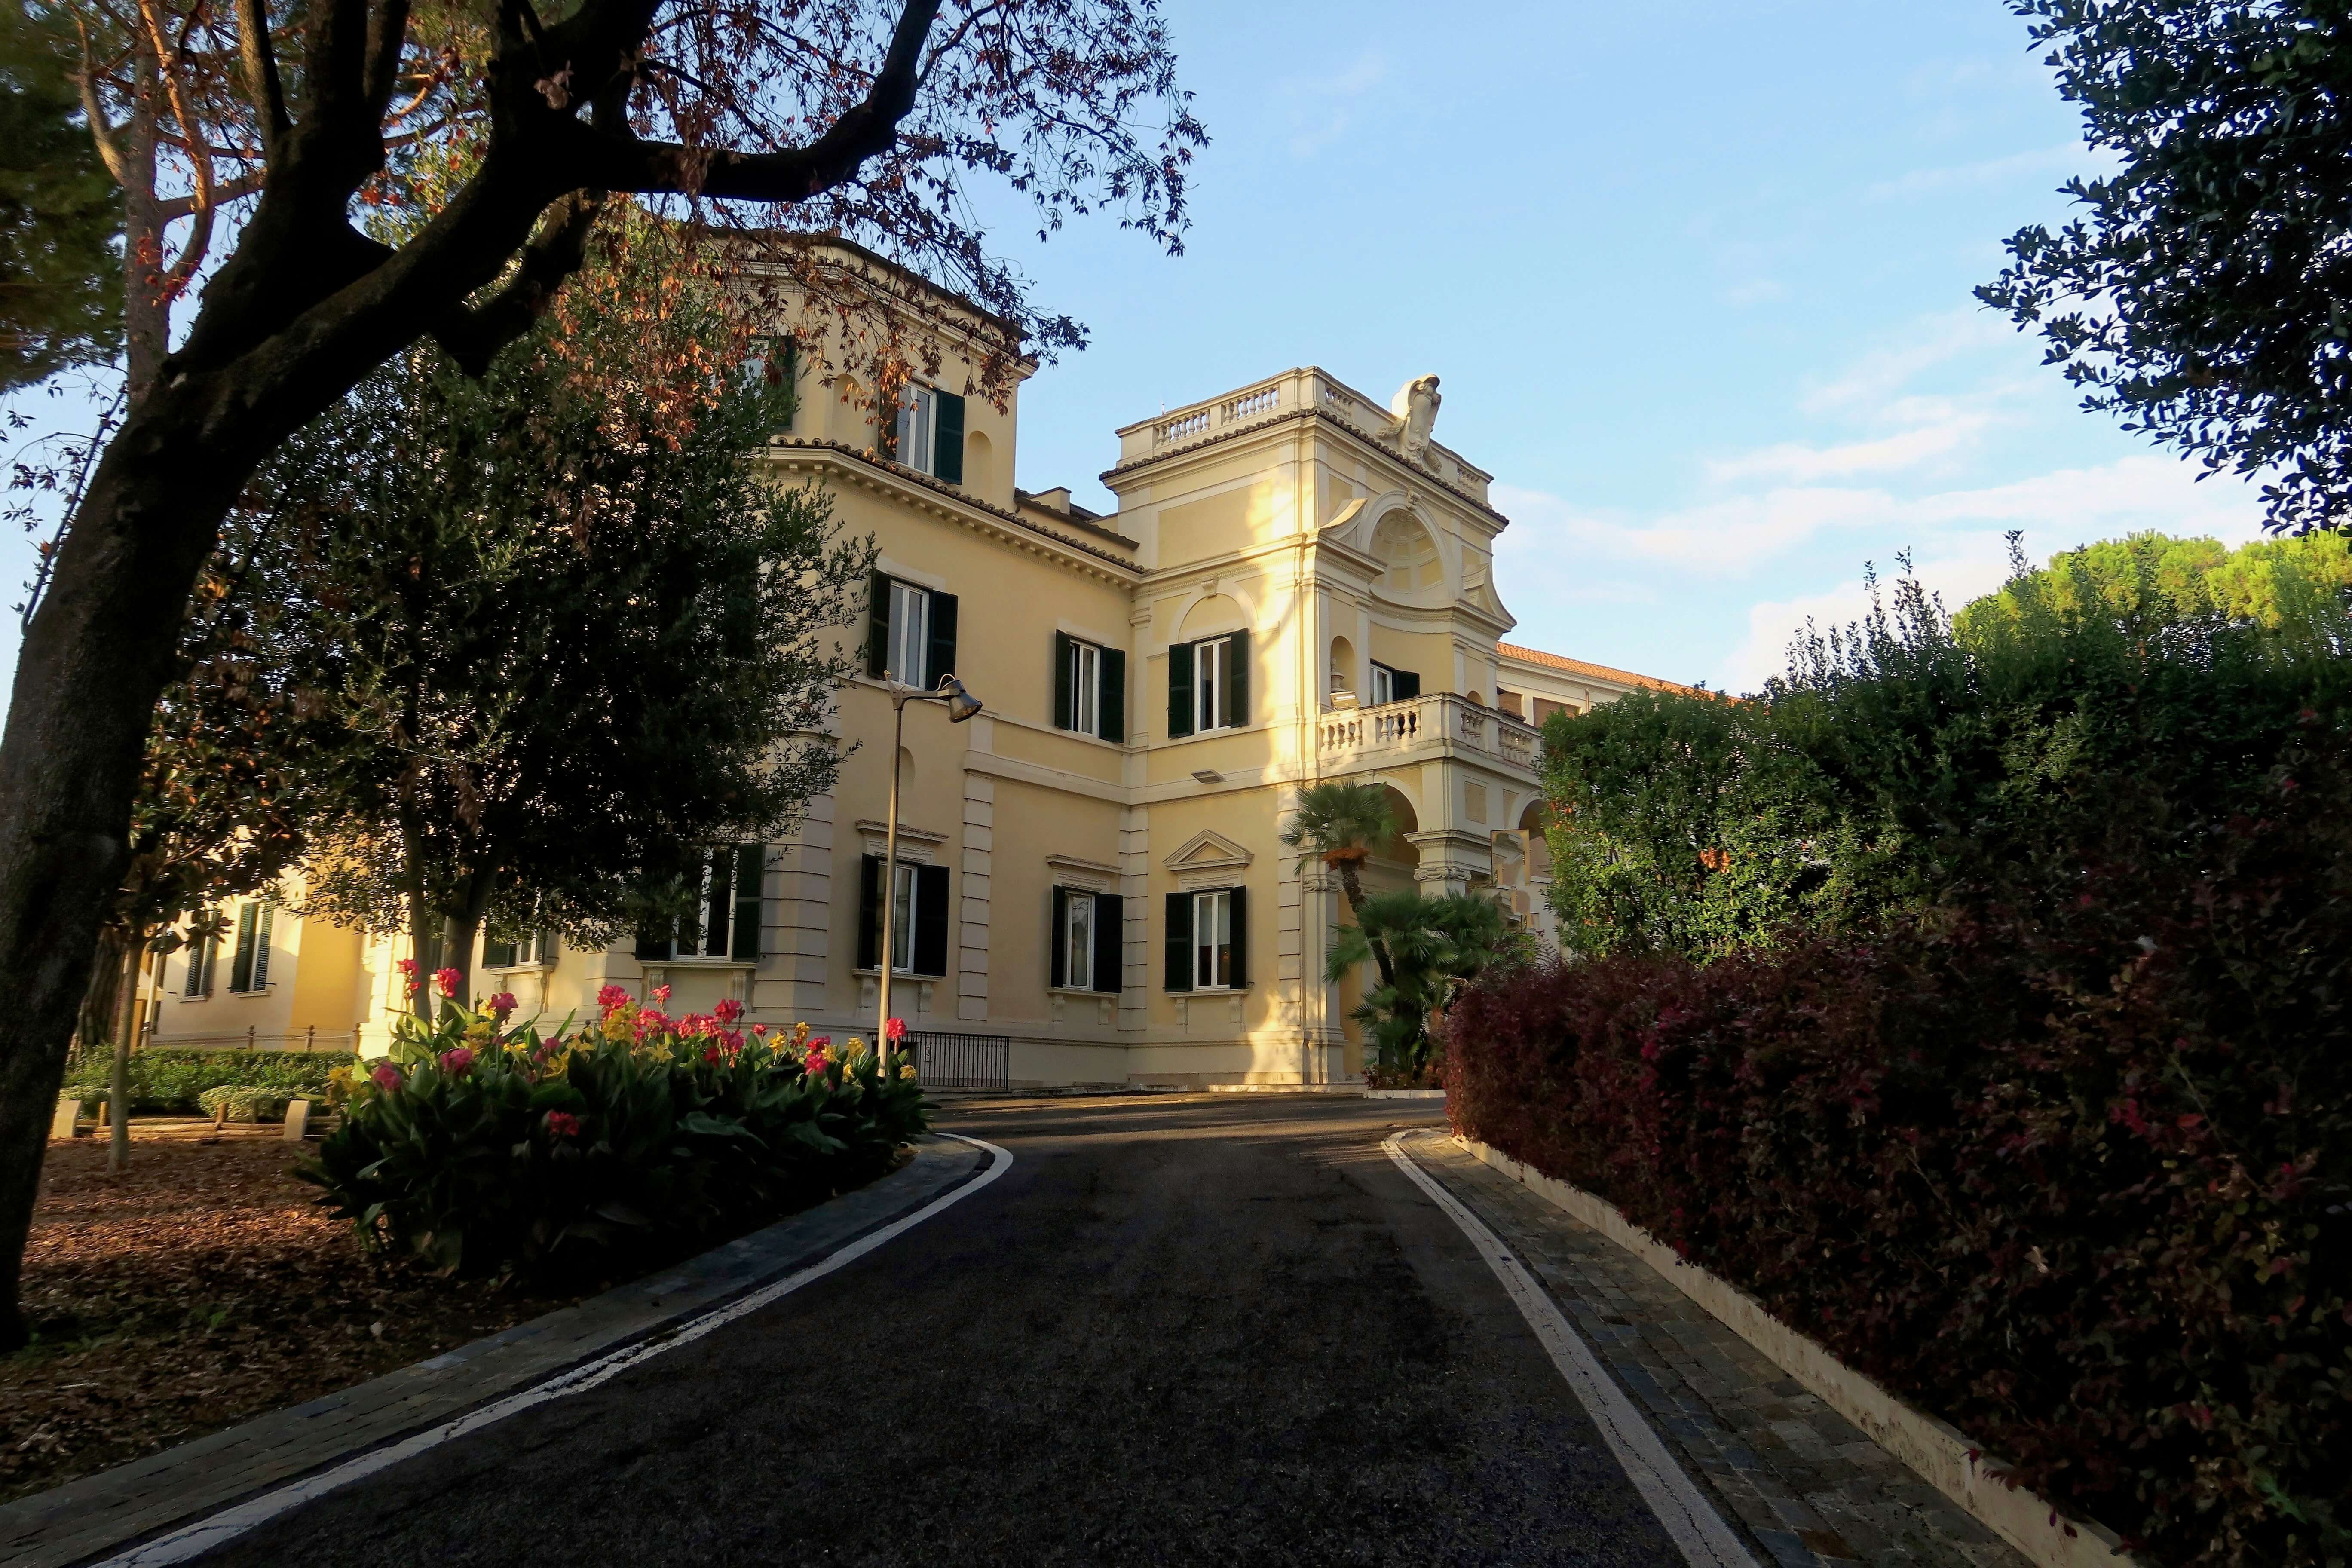 Luiss School of Government